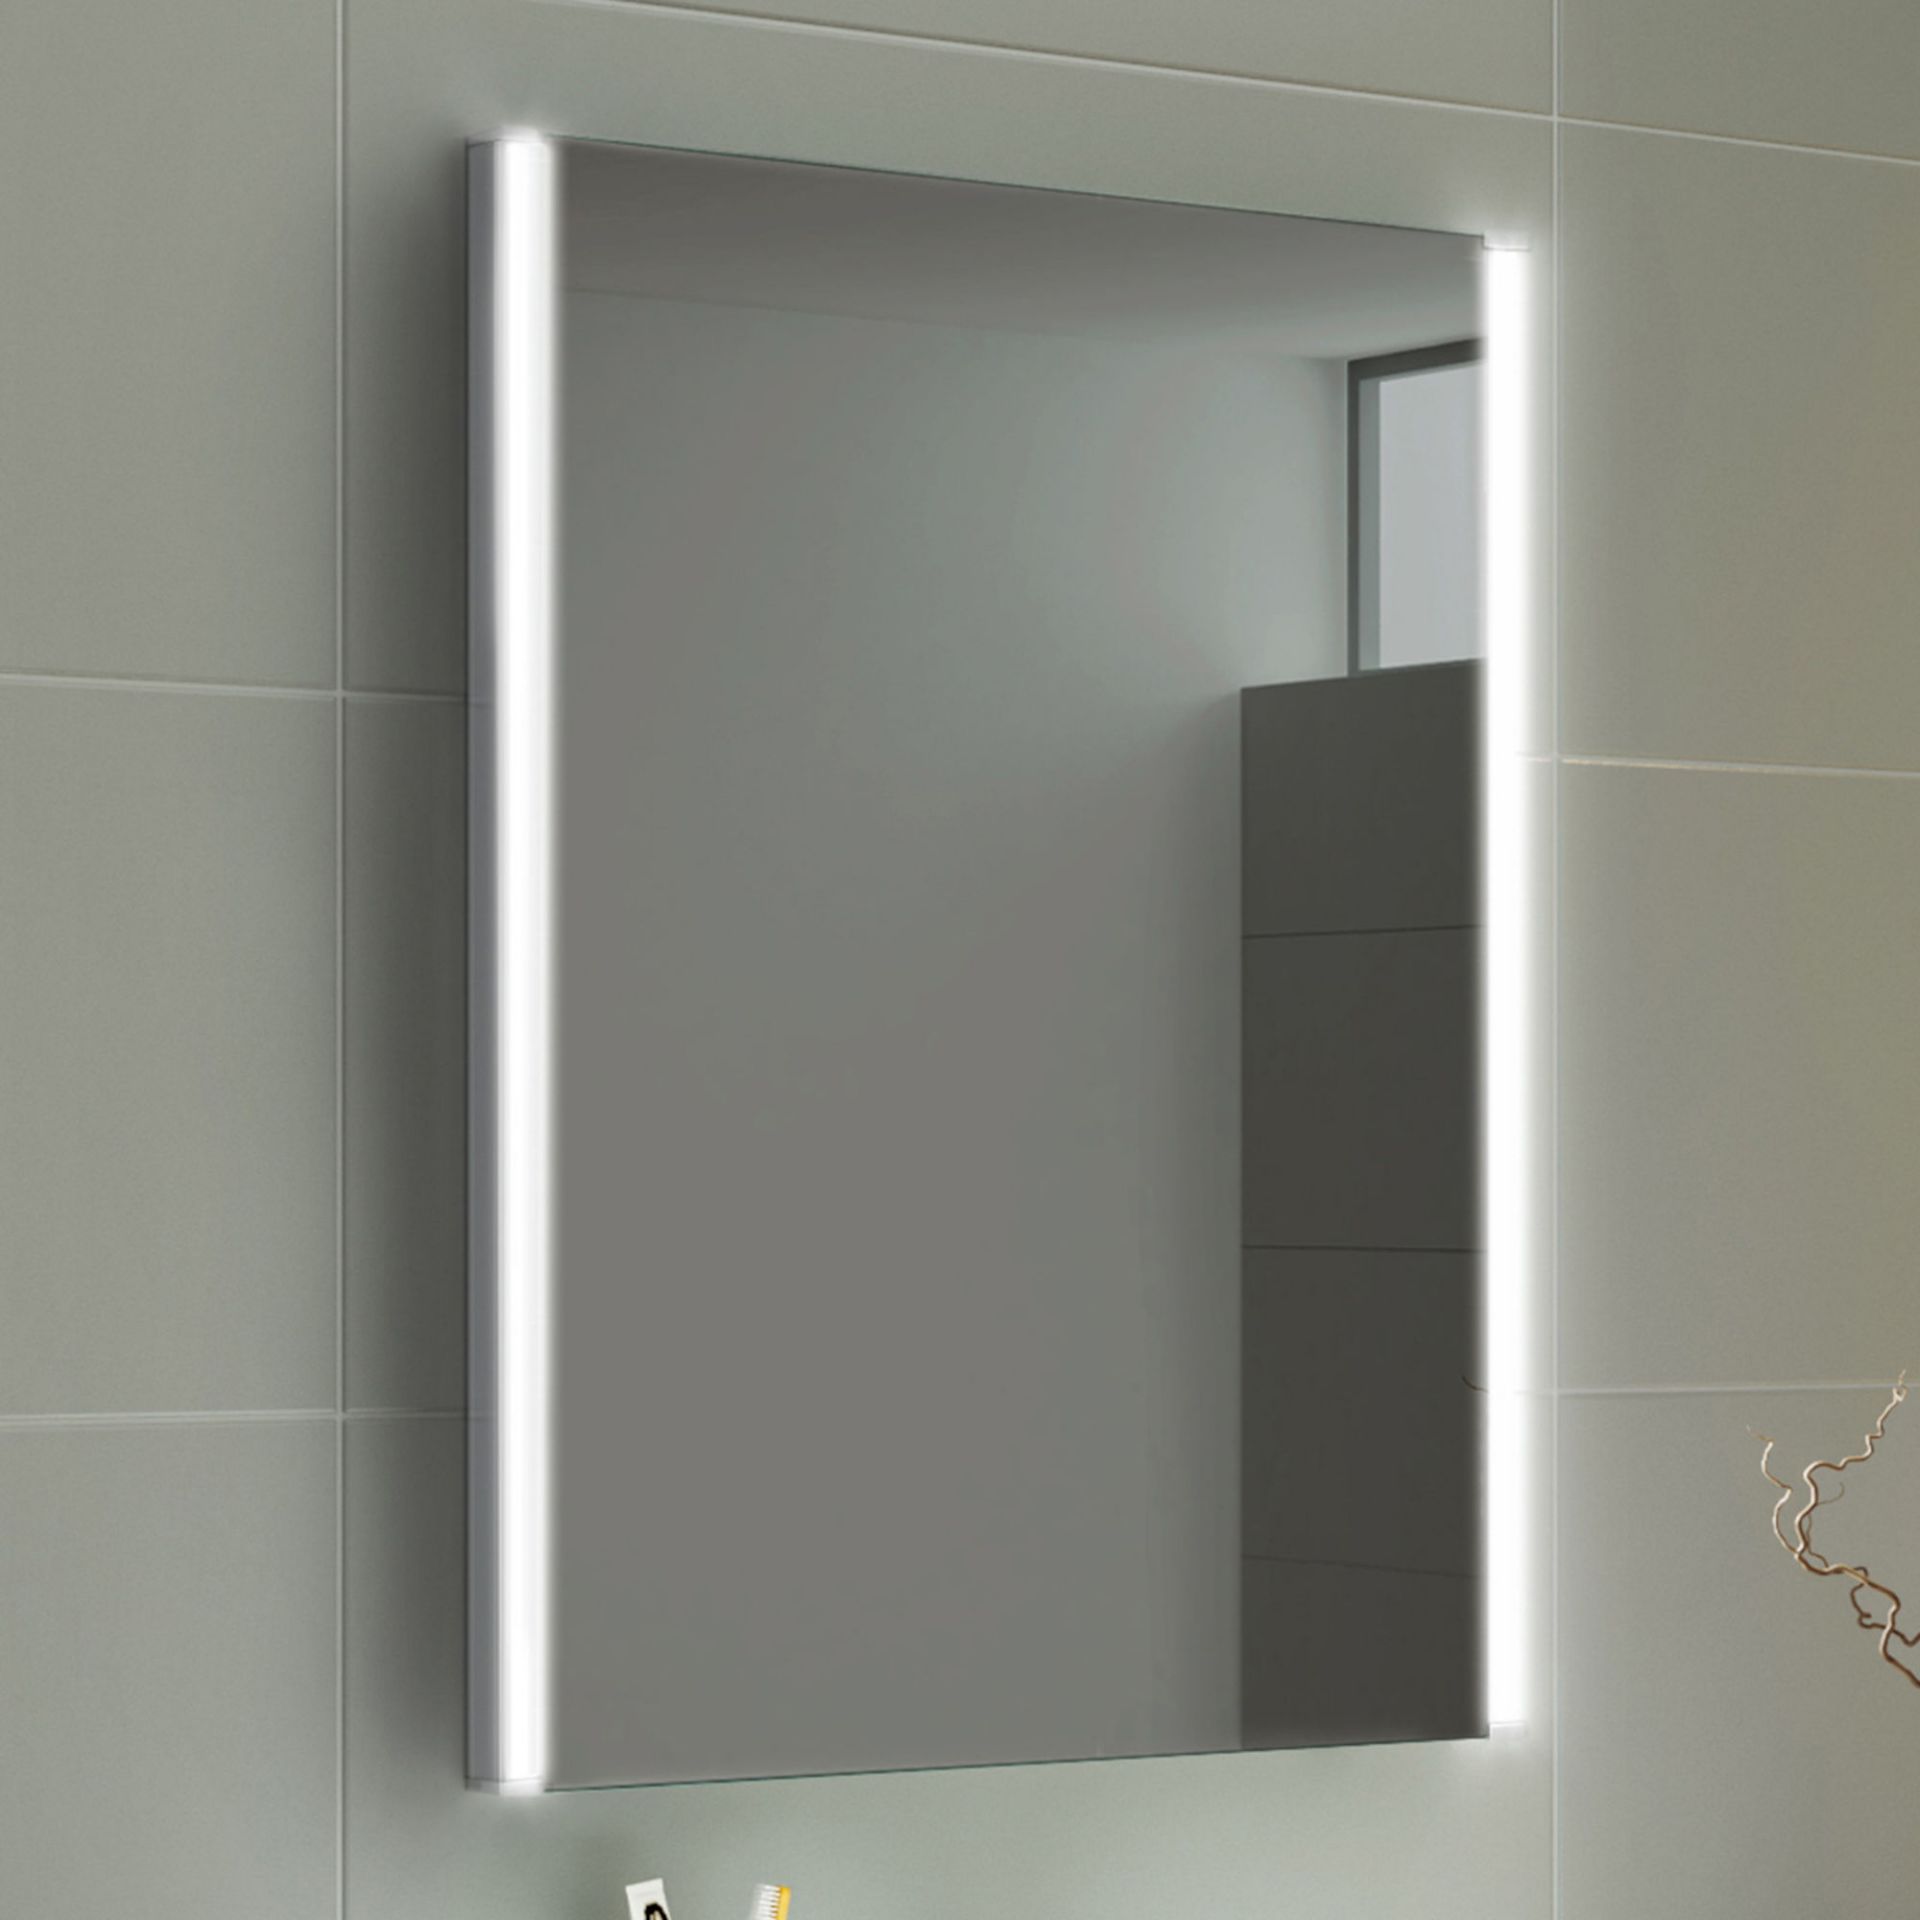 (ZL177) 500x700mm Denver Illuminated LED Mirror - Battery Operated. Energy saving controlled On /